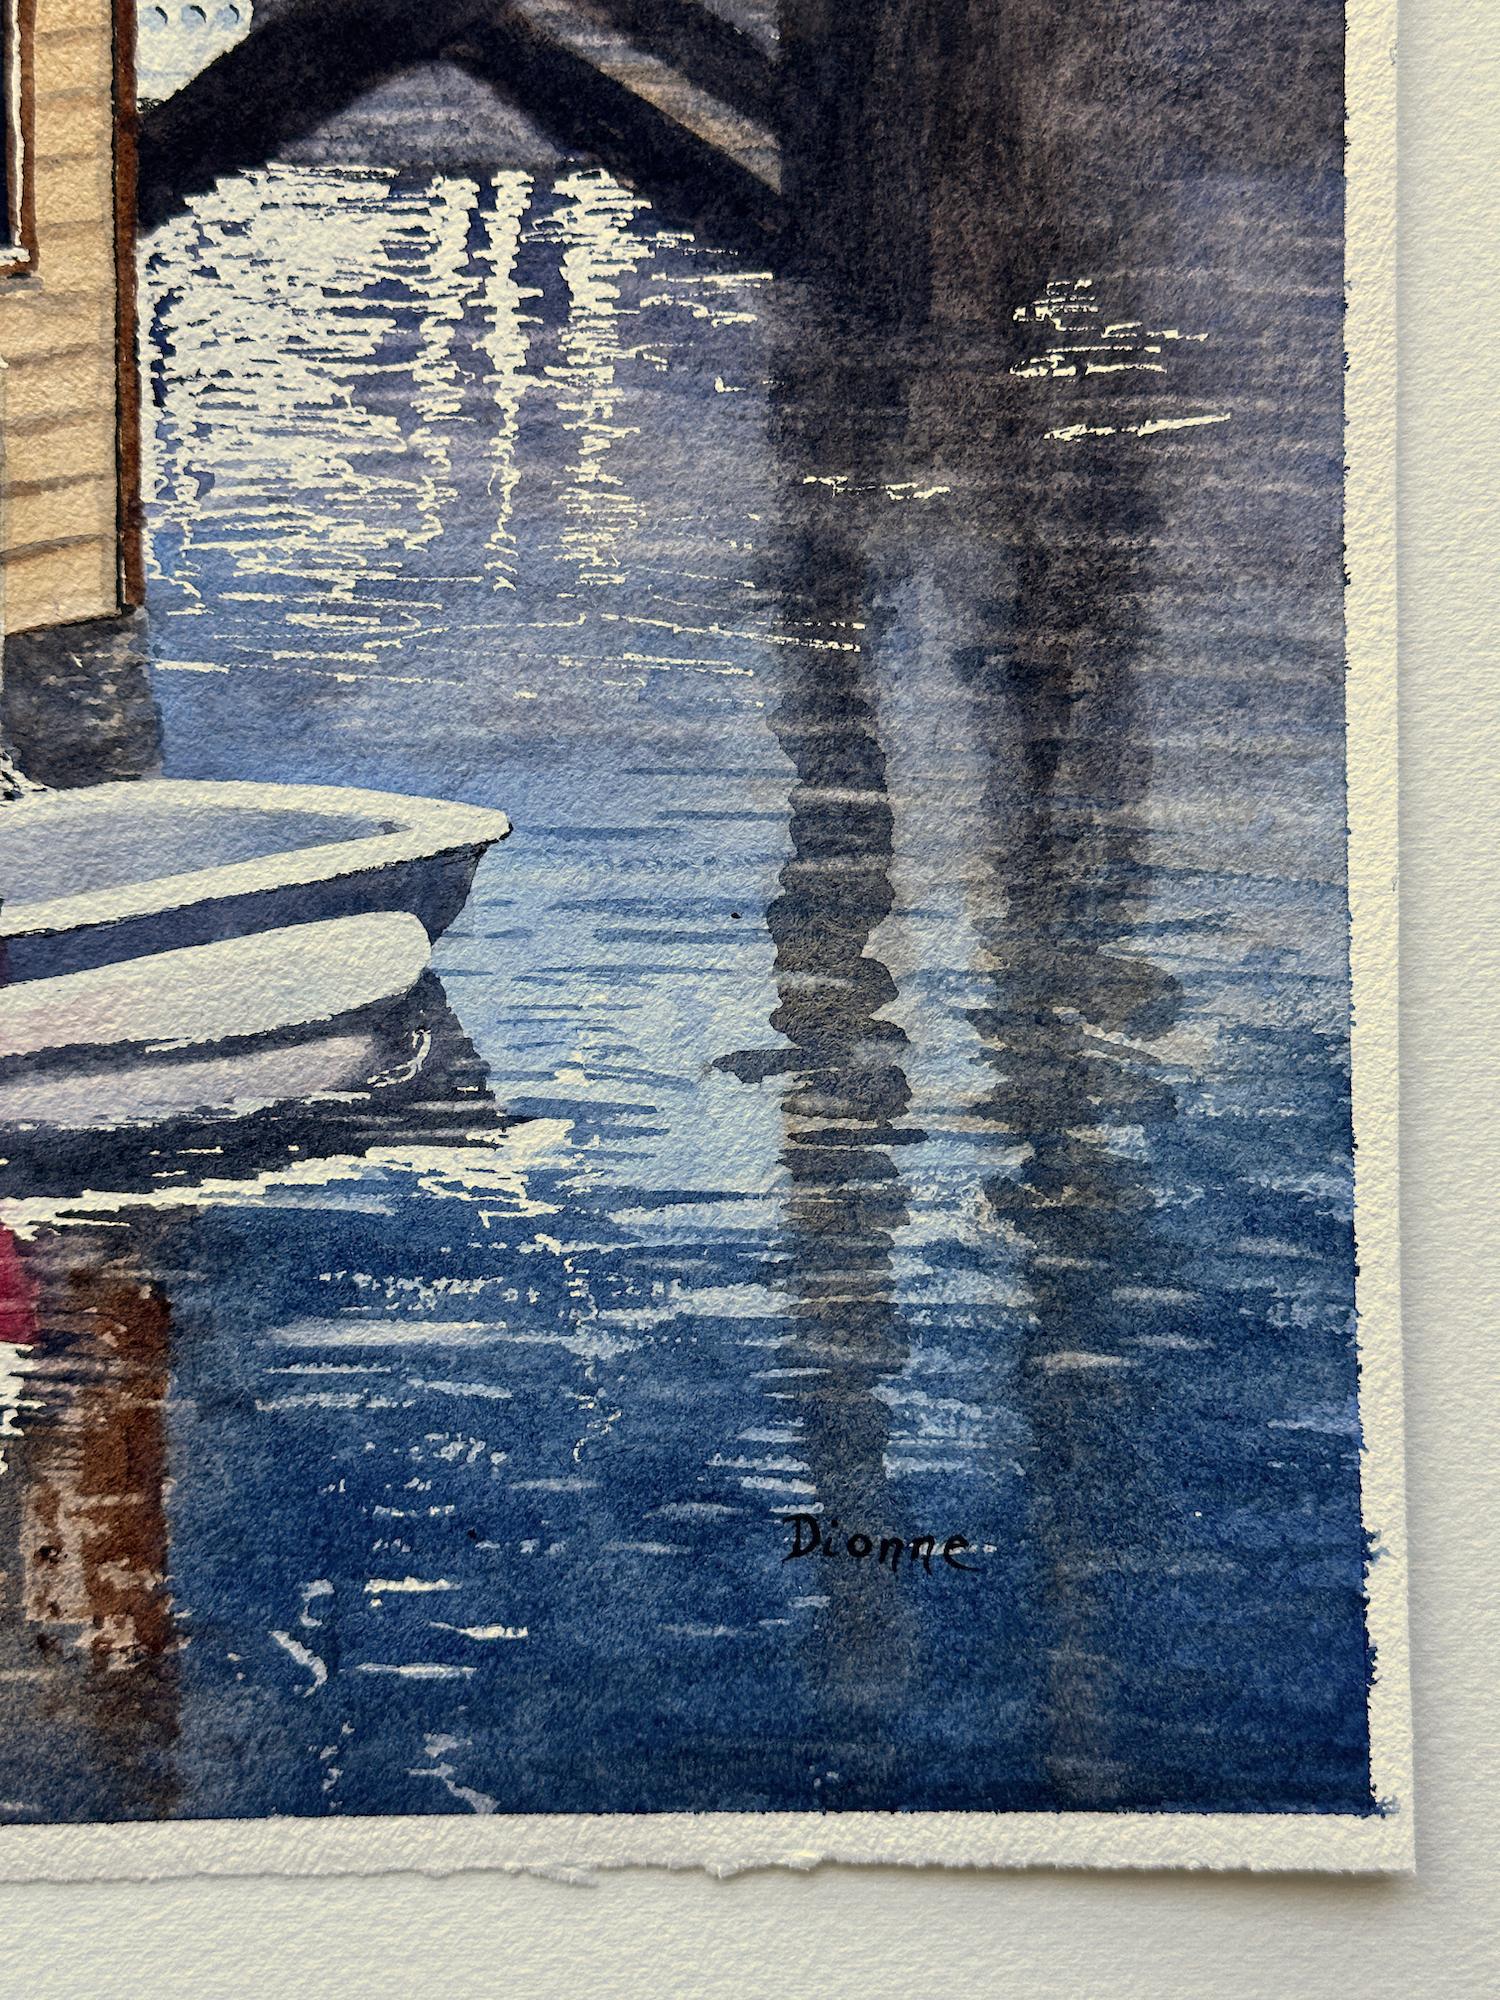 <p>Artist Comments<br>Drawing inspiration from a boathouse floating on the water at Coal Harbour in Vancouver, artist Maurice Dionne paints this idle watercolor scene. In the foreground, a charming yellow house, and red and white canoes rest on a